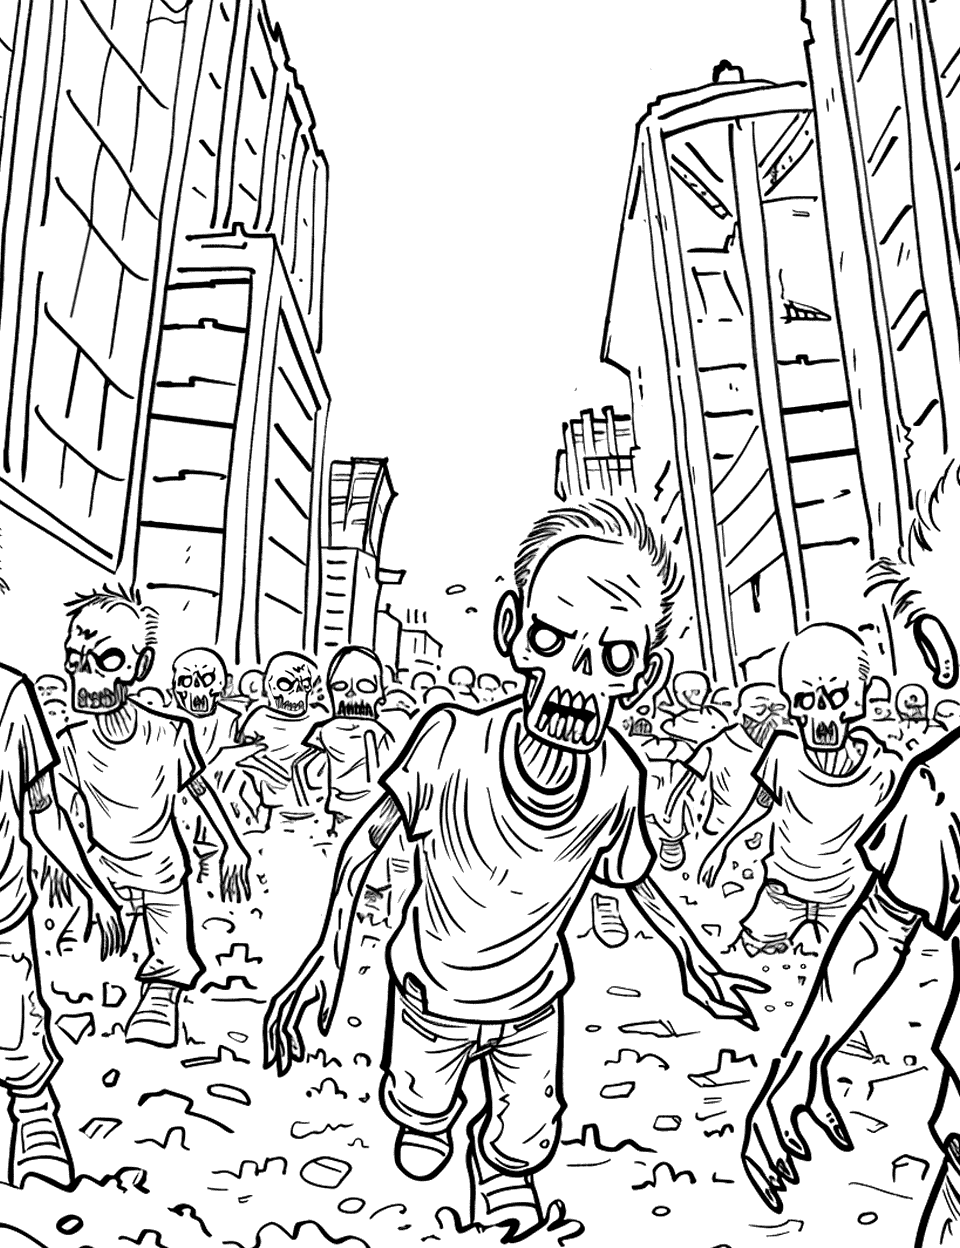 Scary Zombie Chase Coloring Page - Scary zombies chasing through a street.